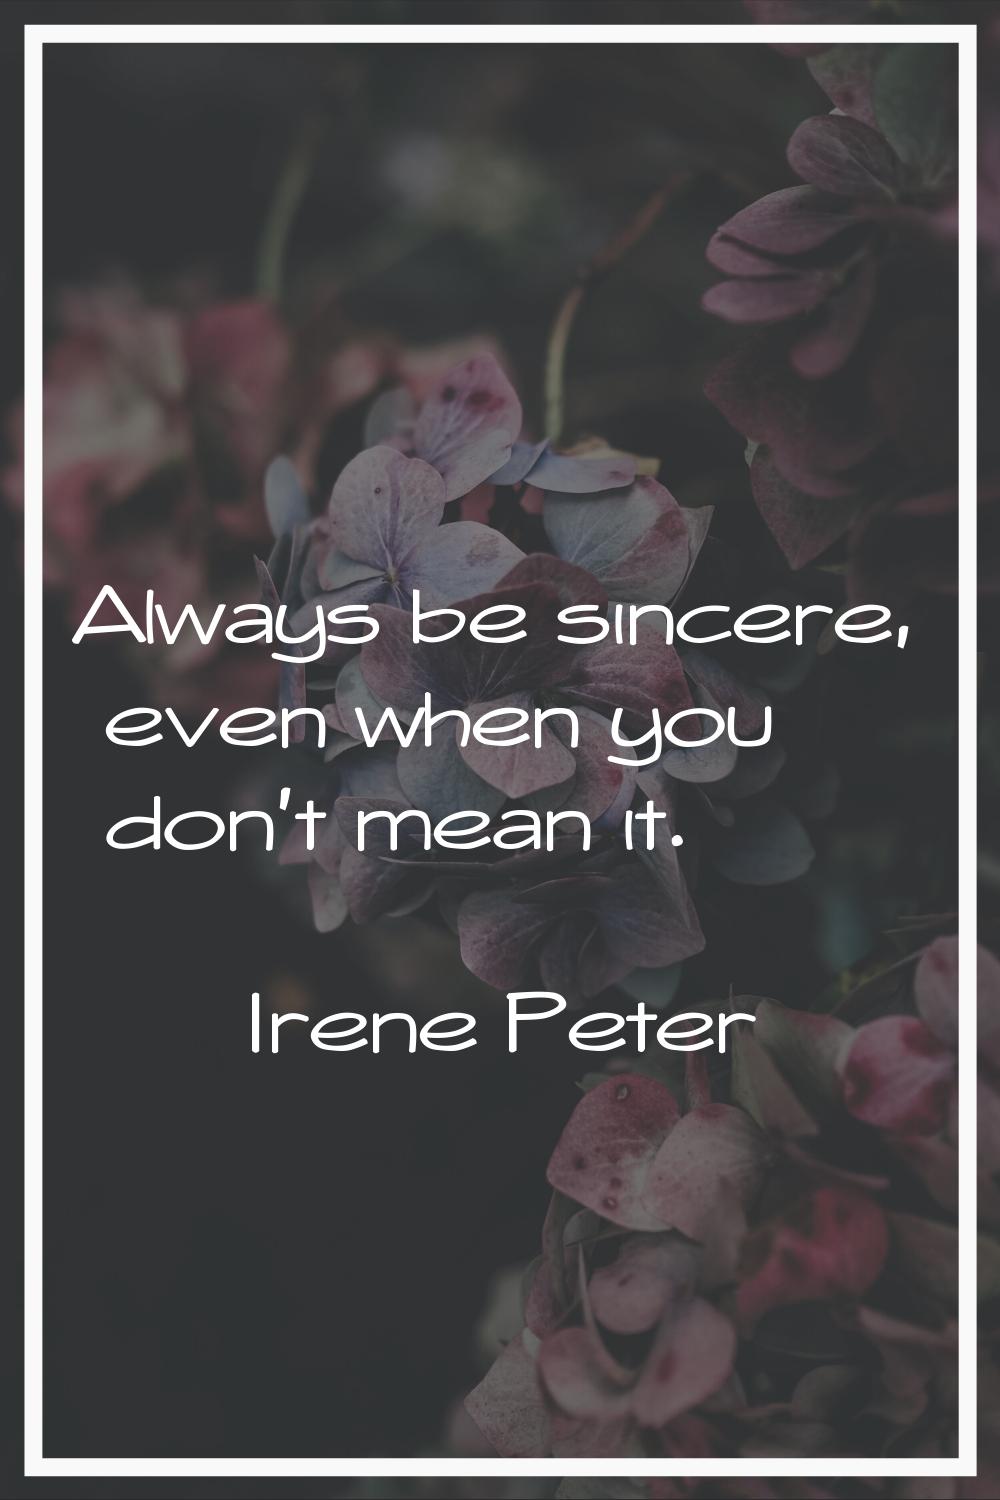 Always be sincere, even when you don't mean it.